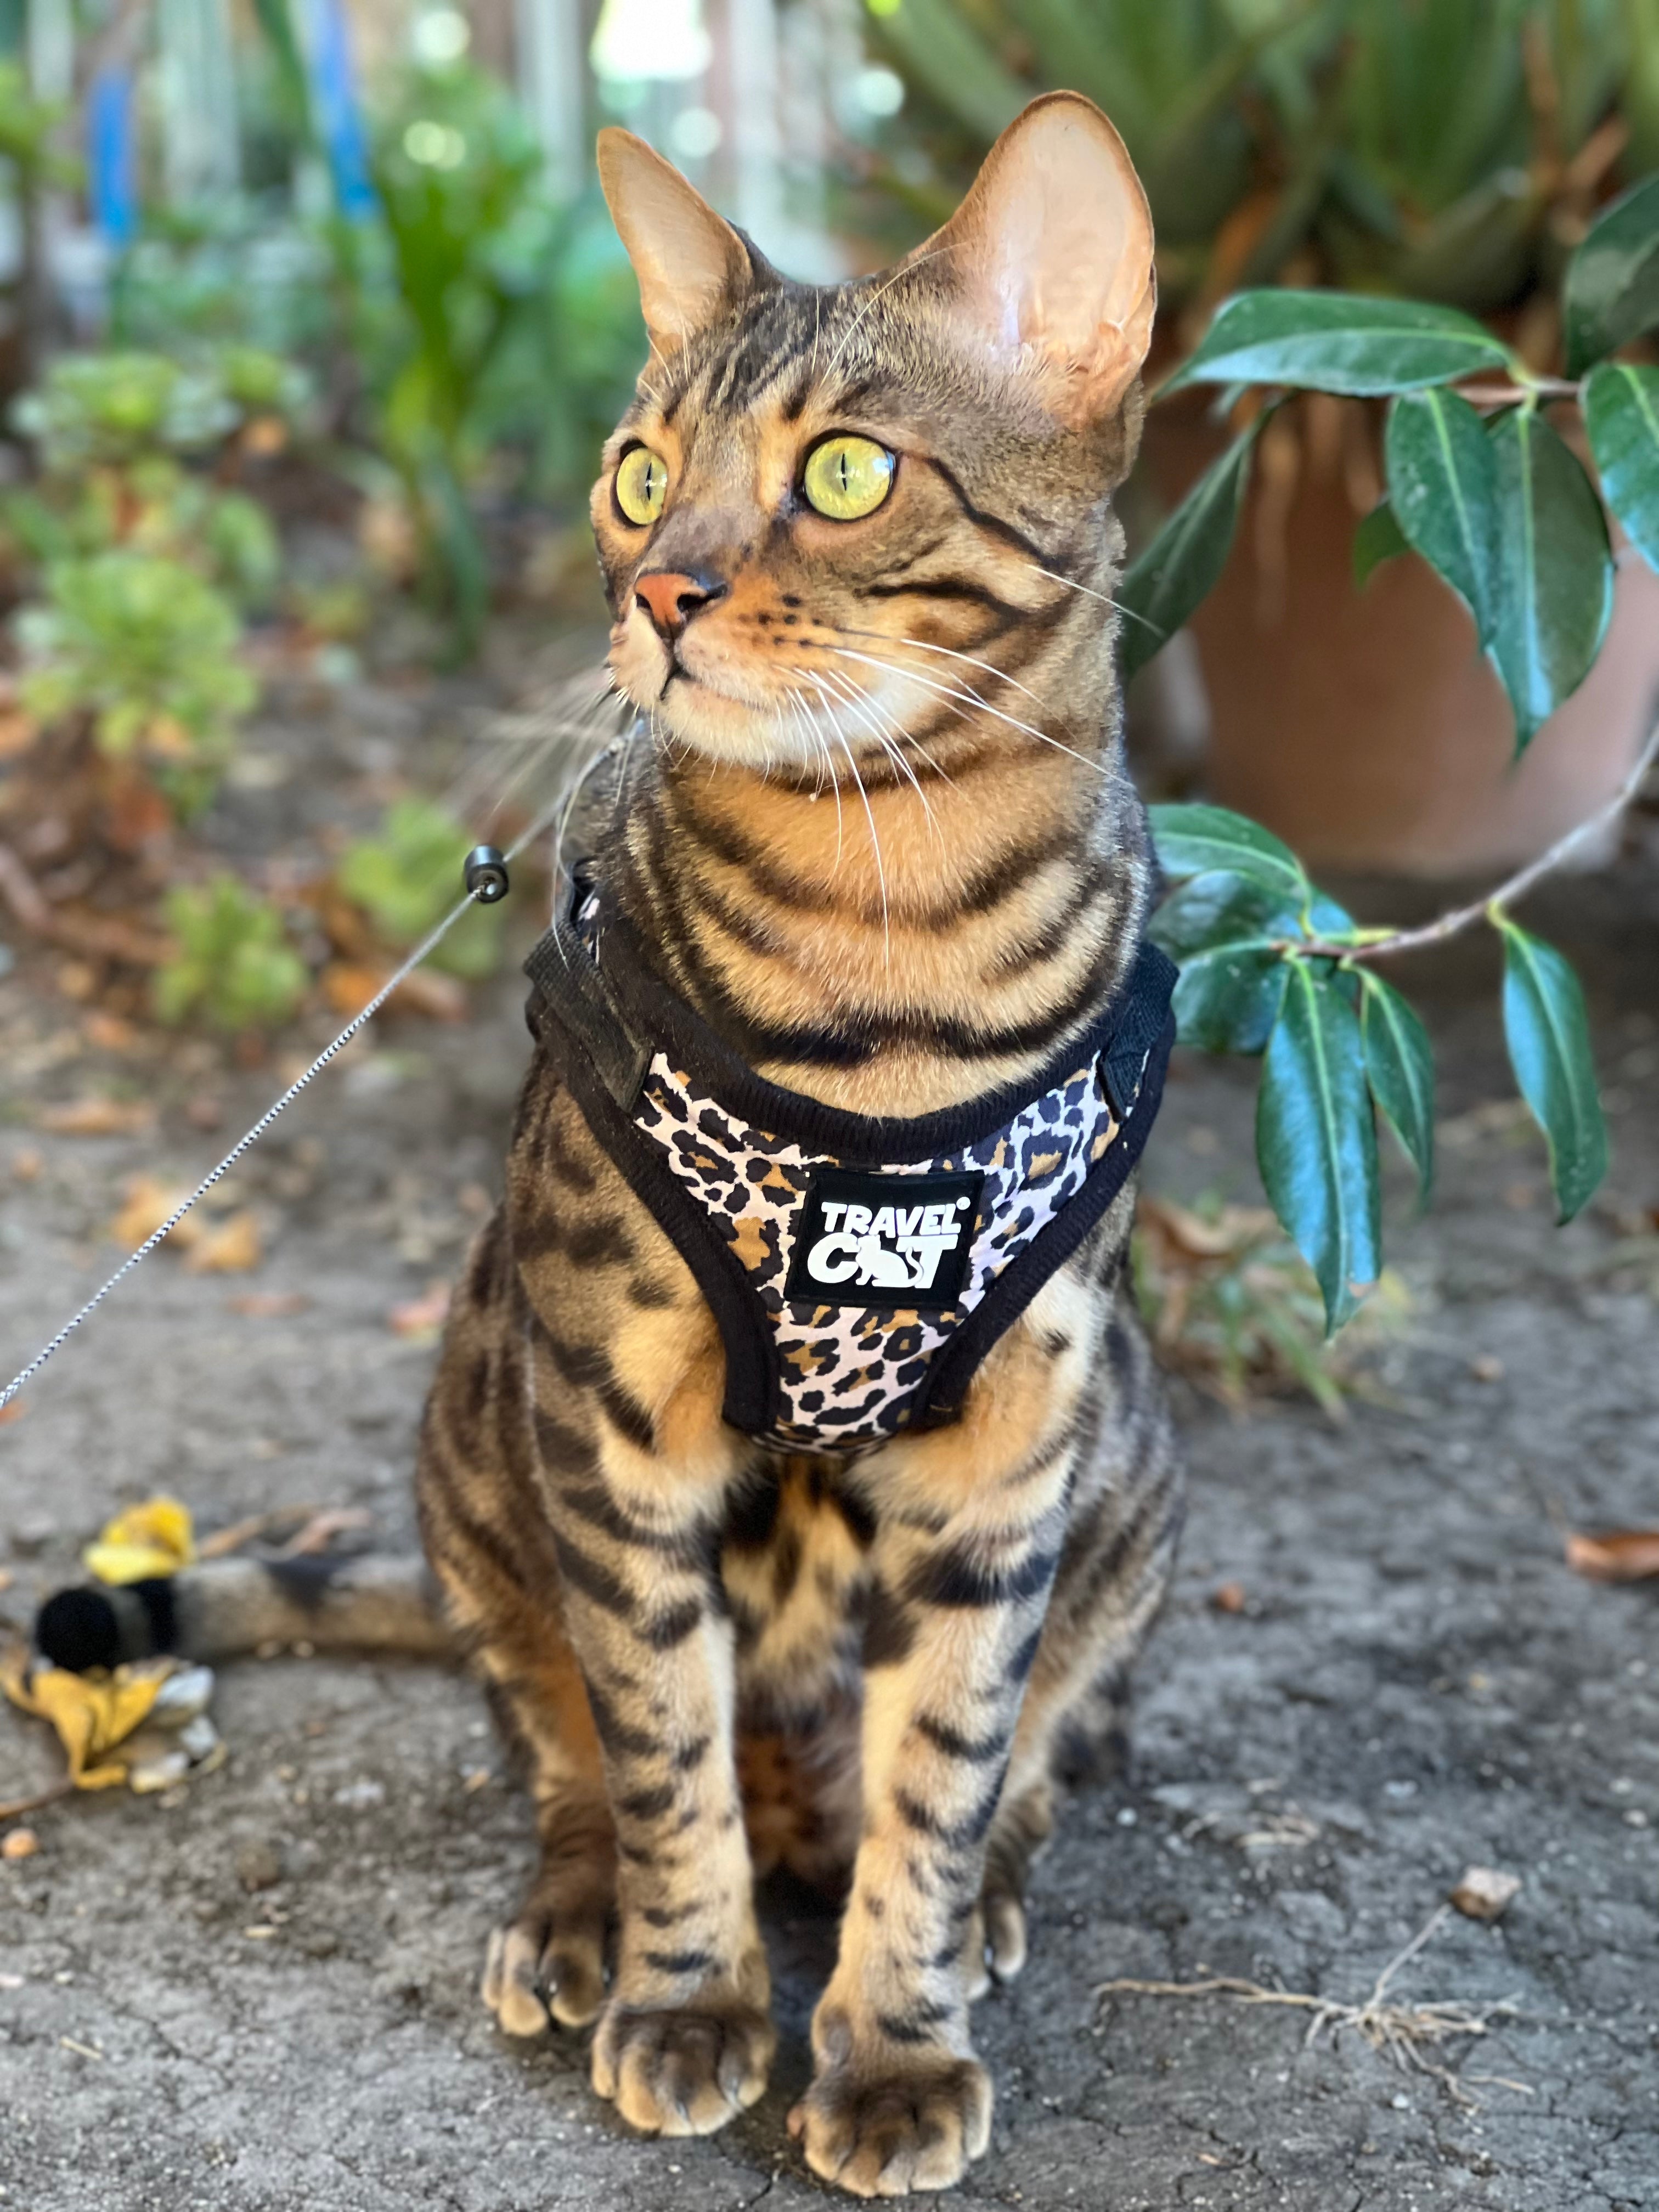 The Pathfinder Cat Harness & Tractive GPS Device Bundle